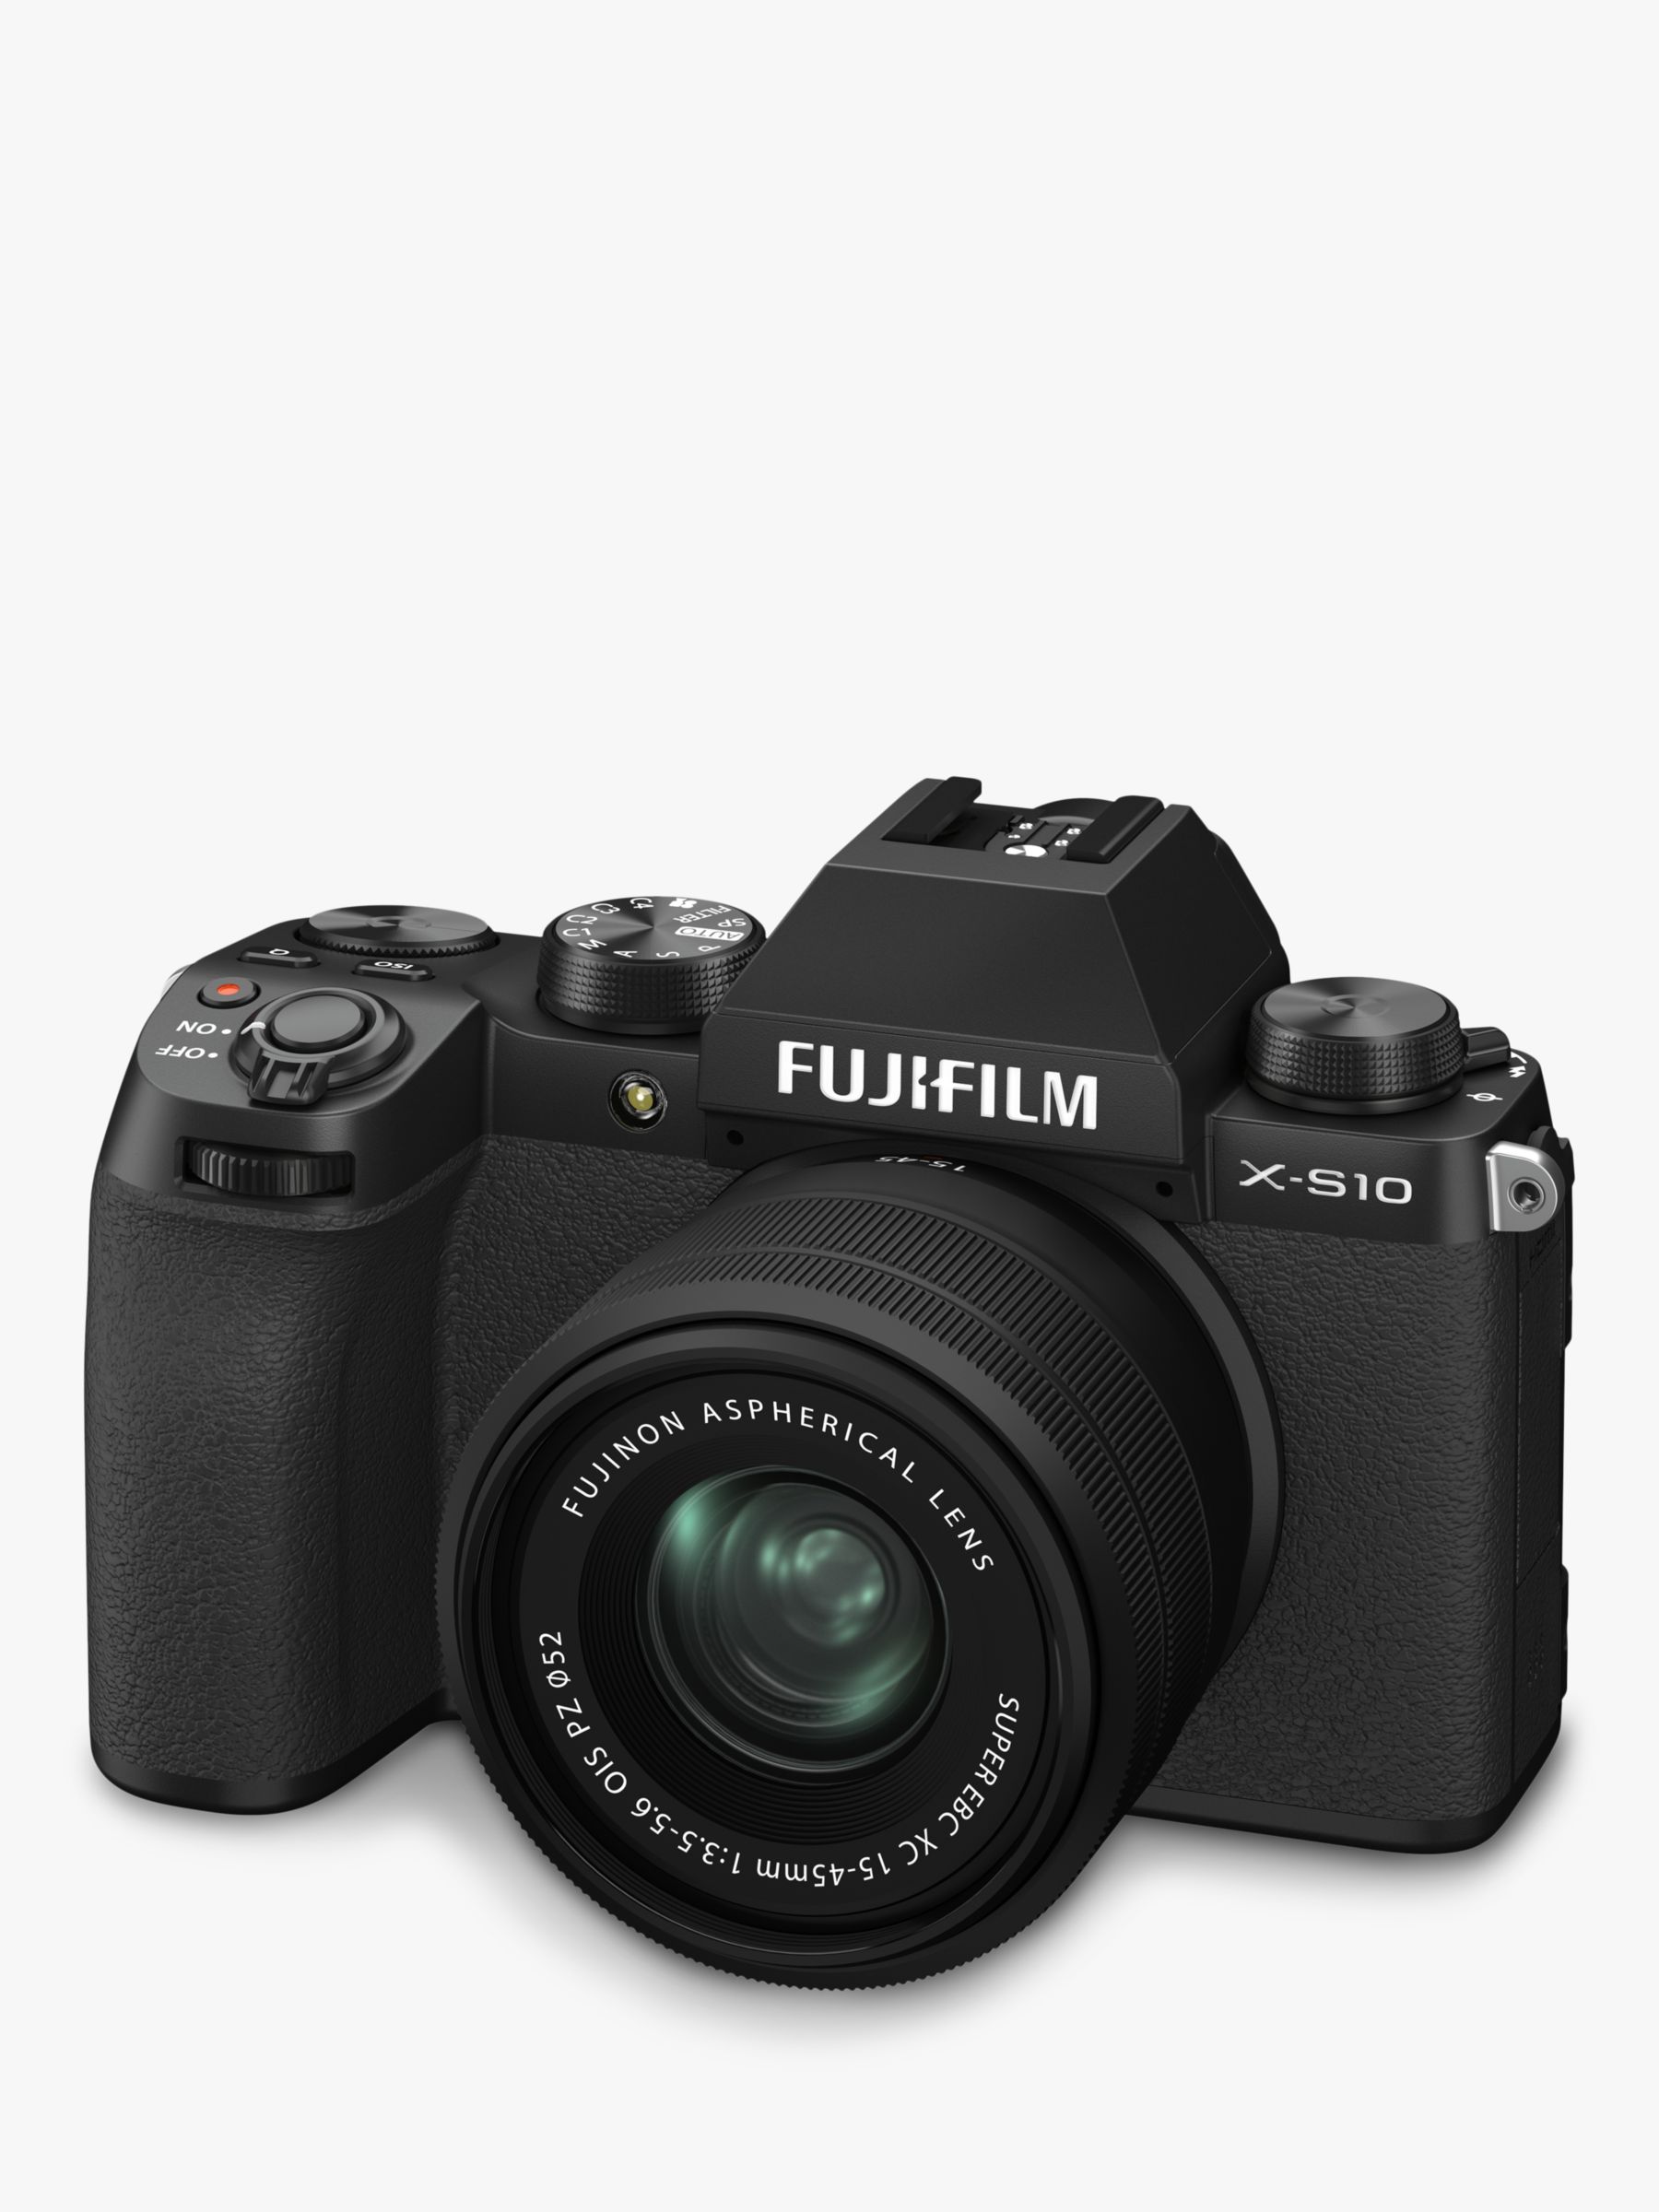 Fujifilm X-S10 Compact System Camera with XC 15-45mm Lens, 4K Ultra HD, 26.1MP, Wi-Fi